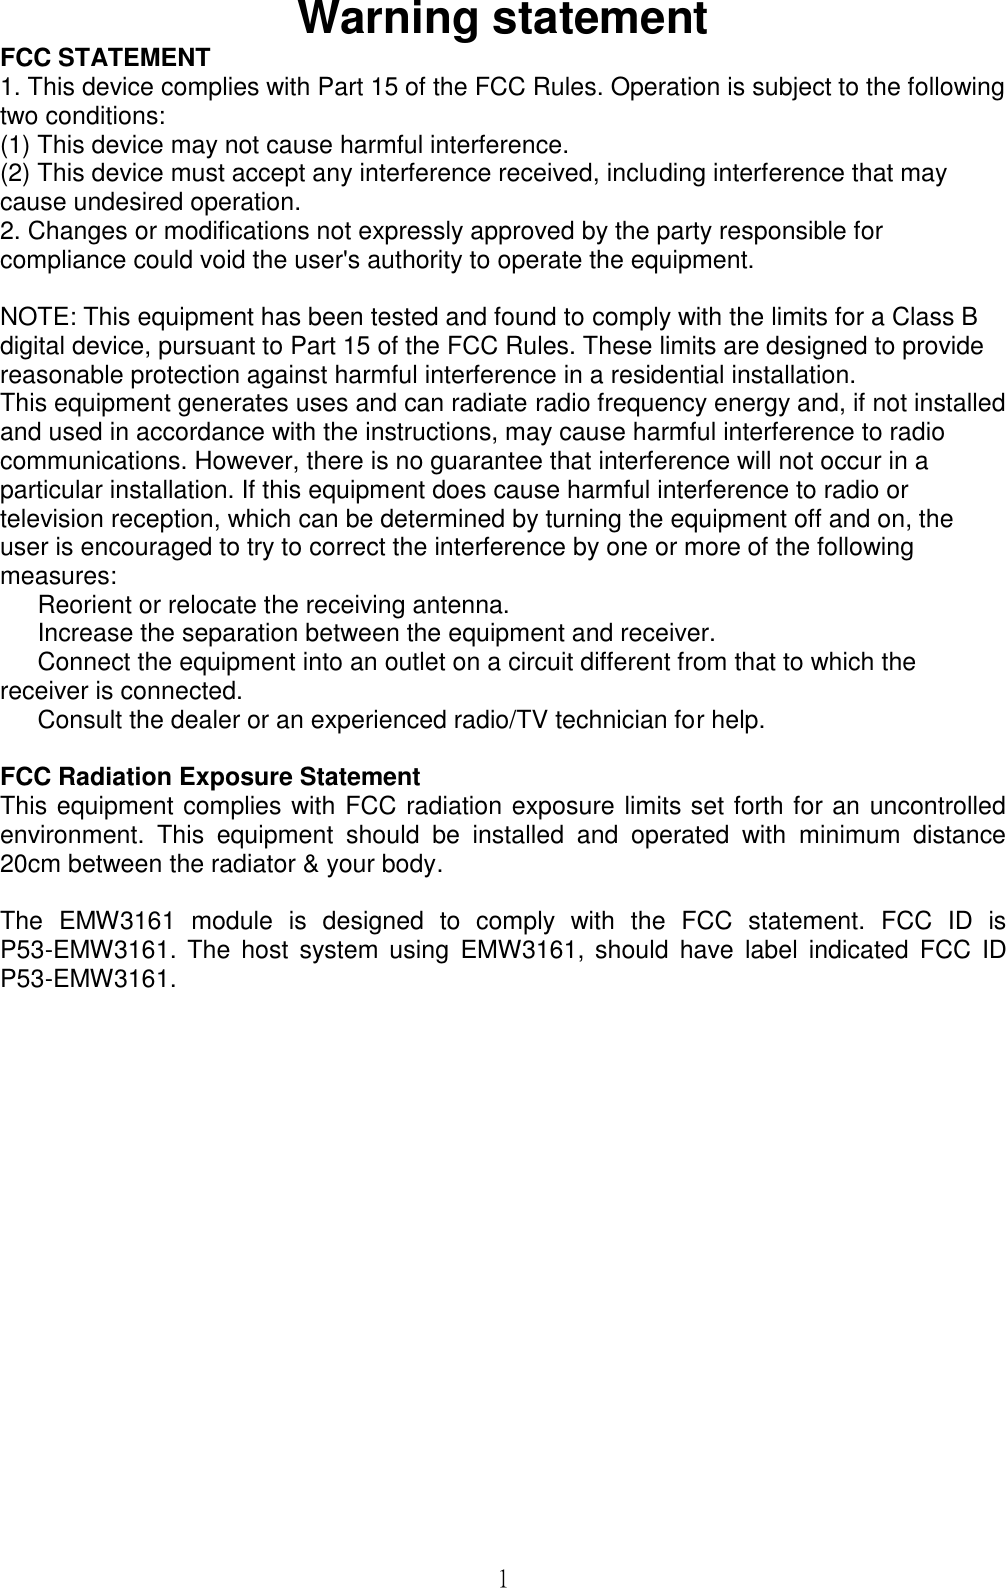 1Warning statementFCC STATEMENT1. This device complies with Part 15 of the FCC Rules. Operation is subject to the followingtwo conditions:(1) This device may not cause harmful interference.(2) This device must accept any interference received, including interference that maycause undesired operation.2. Changes or modifications not expressly approved by the party responsible forcompliance could void the user&apos;s authority to operate the equipment.NOTE: This equipment has been tested and found to comply with the limits for a Class Bdigital device, pursuant to Part 15 of the FCC Rules. These limits are designed to providereasonable protection against harmful interference in a residential installation.This equipment generates uses and can radiate radio frequency energy and, if not installedand used in accordance with the instructions, may cause harmful interference to radiocommunications. However, there is no guarantee that interference will not occur in aparticular installation. If this equipment does cause harmful interference to radio ortelevision reception, which can be determined by turning the equipment off and on, theuser is encouraged to try to correct the interference by one or more of the followingmeasures:Reorient or relocate the receiving antenna.Increase the separation between the equipment and receiver.Connect the equipment into an outlet on a circuit different from that to which thereceiver is connected.Consult the dealer or an experienced radio/TV technician for help.FCC Radiation Exposure StatementThis equipment complies with FCC radiation exposure limits set forth for an uncontrolledenvironment.  This  equipment  should  be  installed  and  operated  with  minimum  distance20cm between the radiator &amp; your body.The EMW3161 module  is  designed  to  comply  with  the  FCC  statement.  FCC  ID  isP53-EMW3161.  The  host system  using EMW3161,  should  have label  indicated  FCC IDP53-EMW3161.